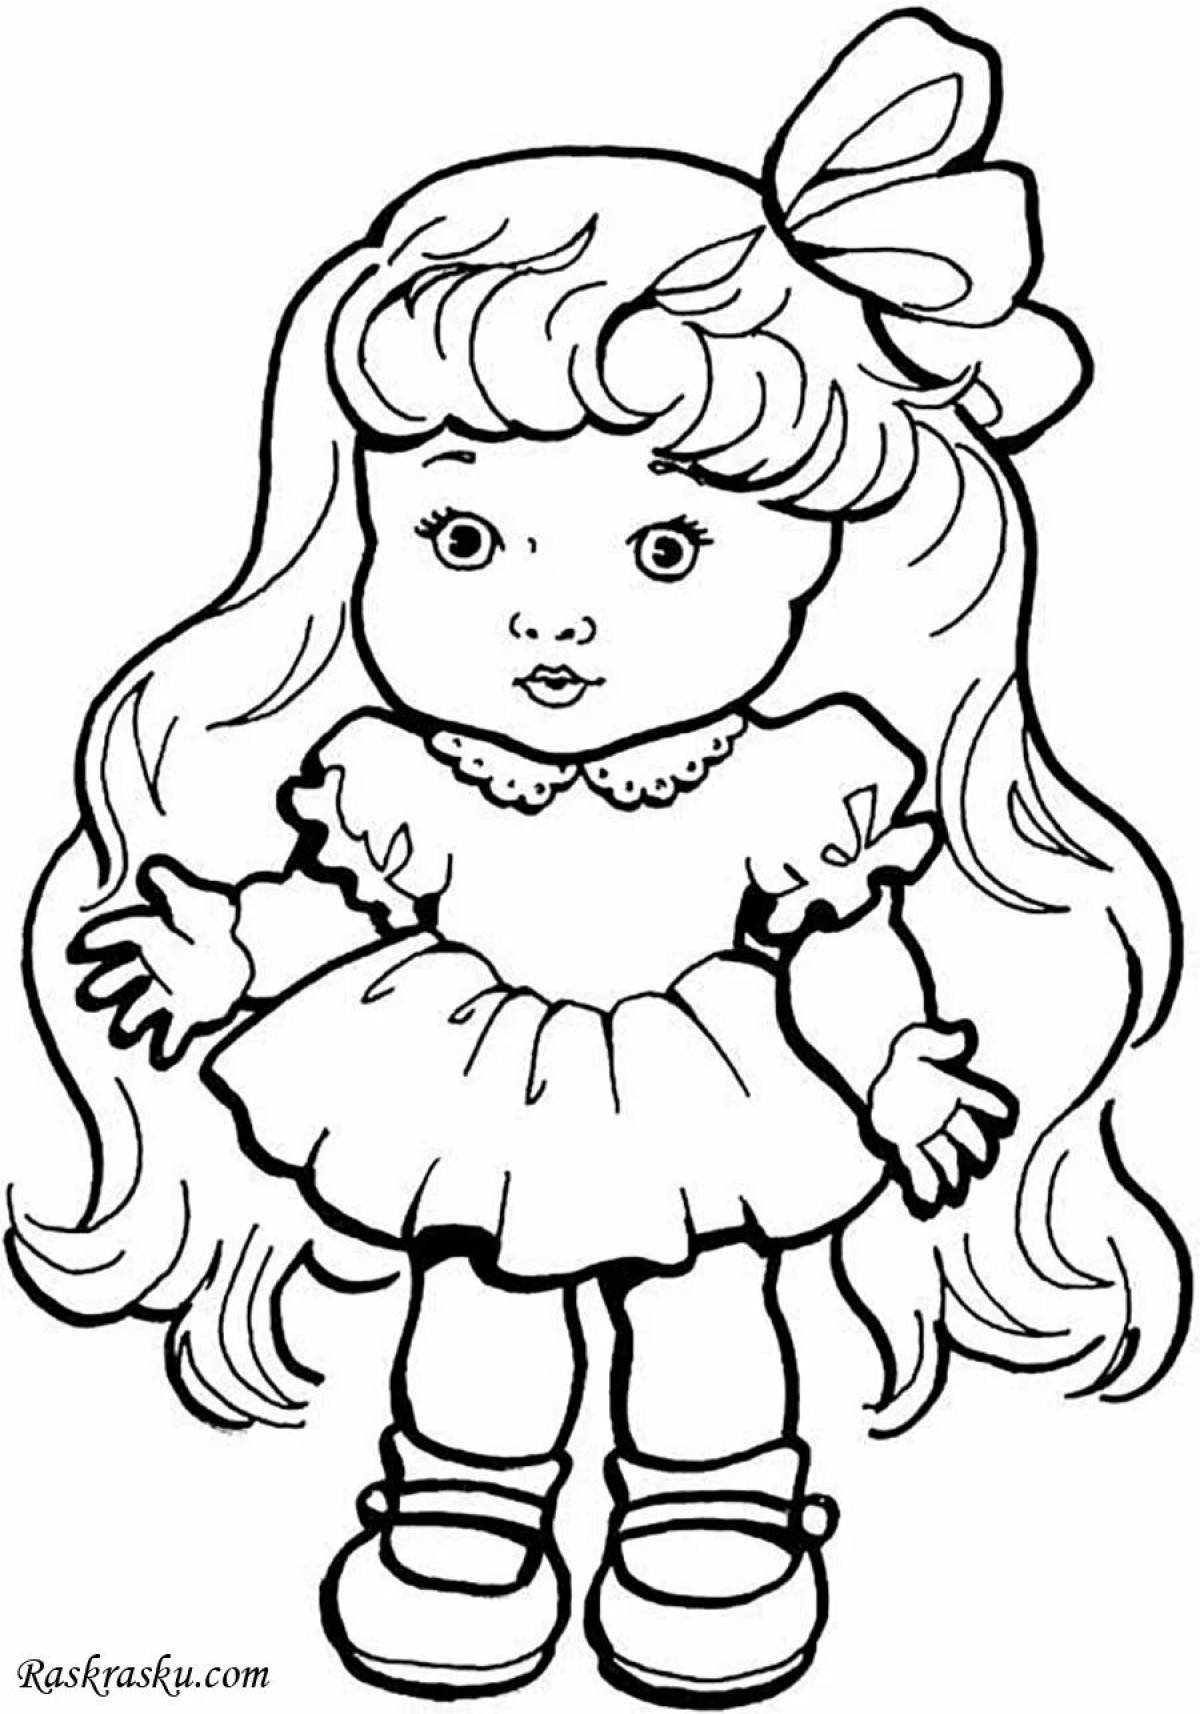 Doll color-explosion coloring page for children 5-6 years old